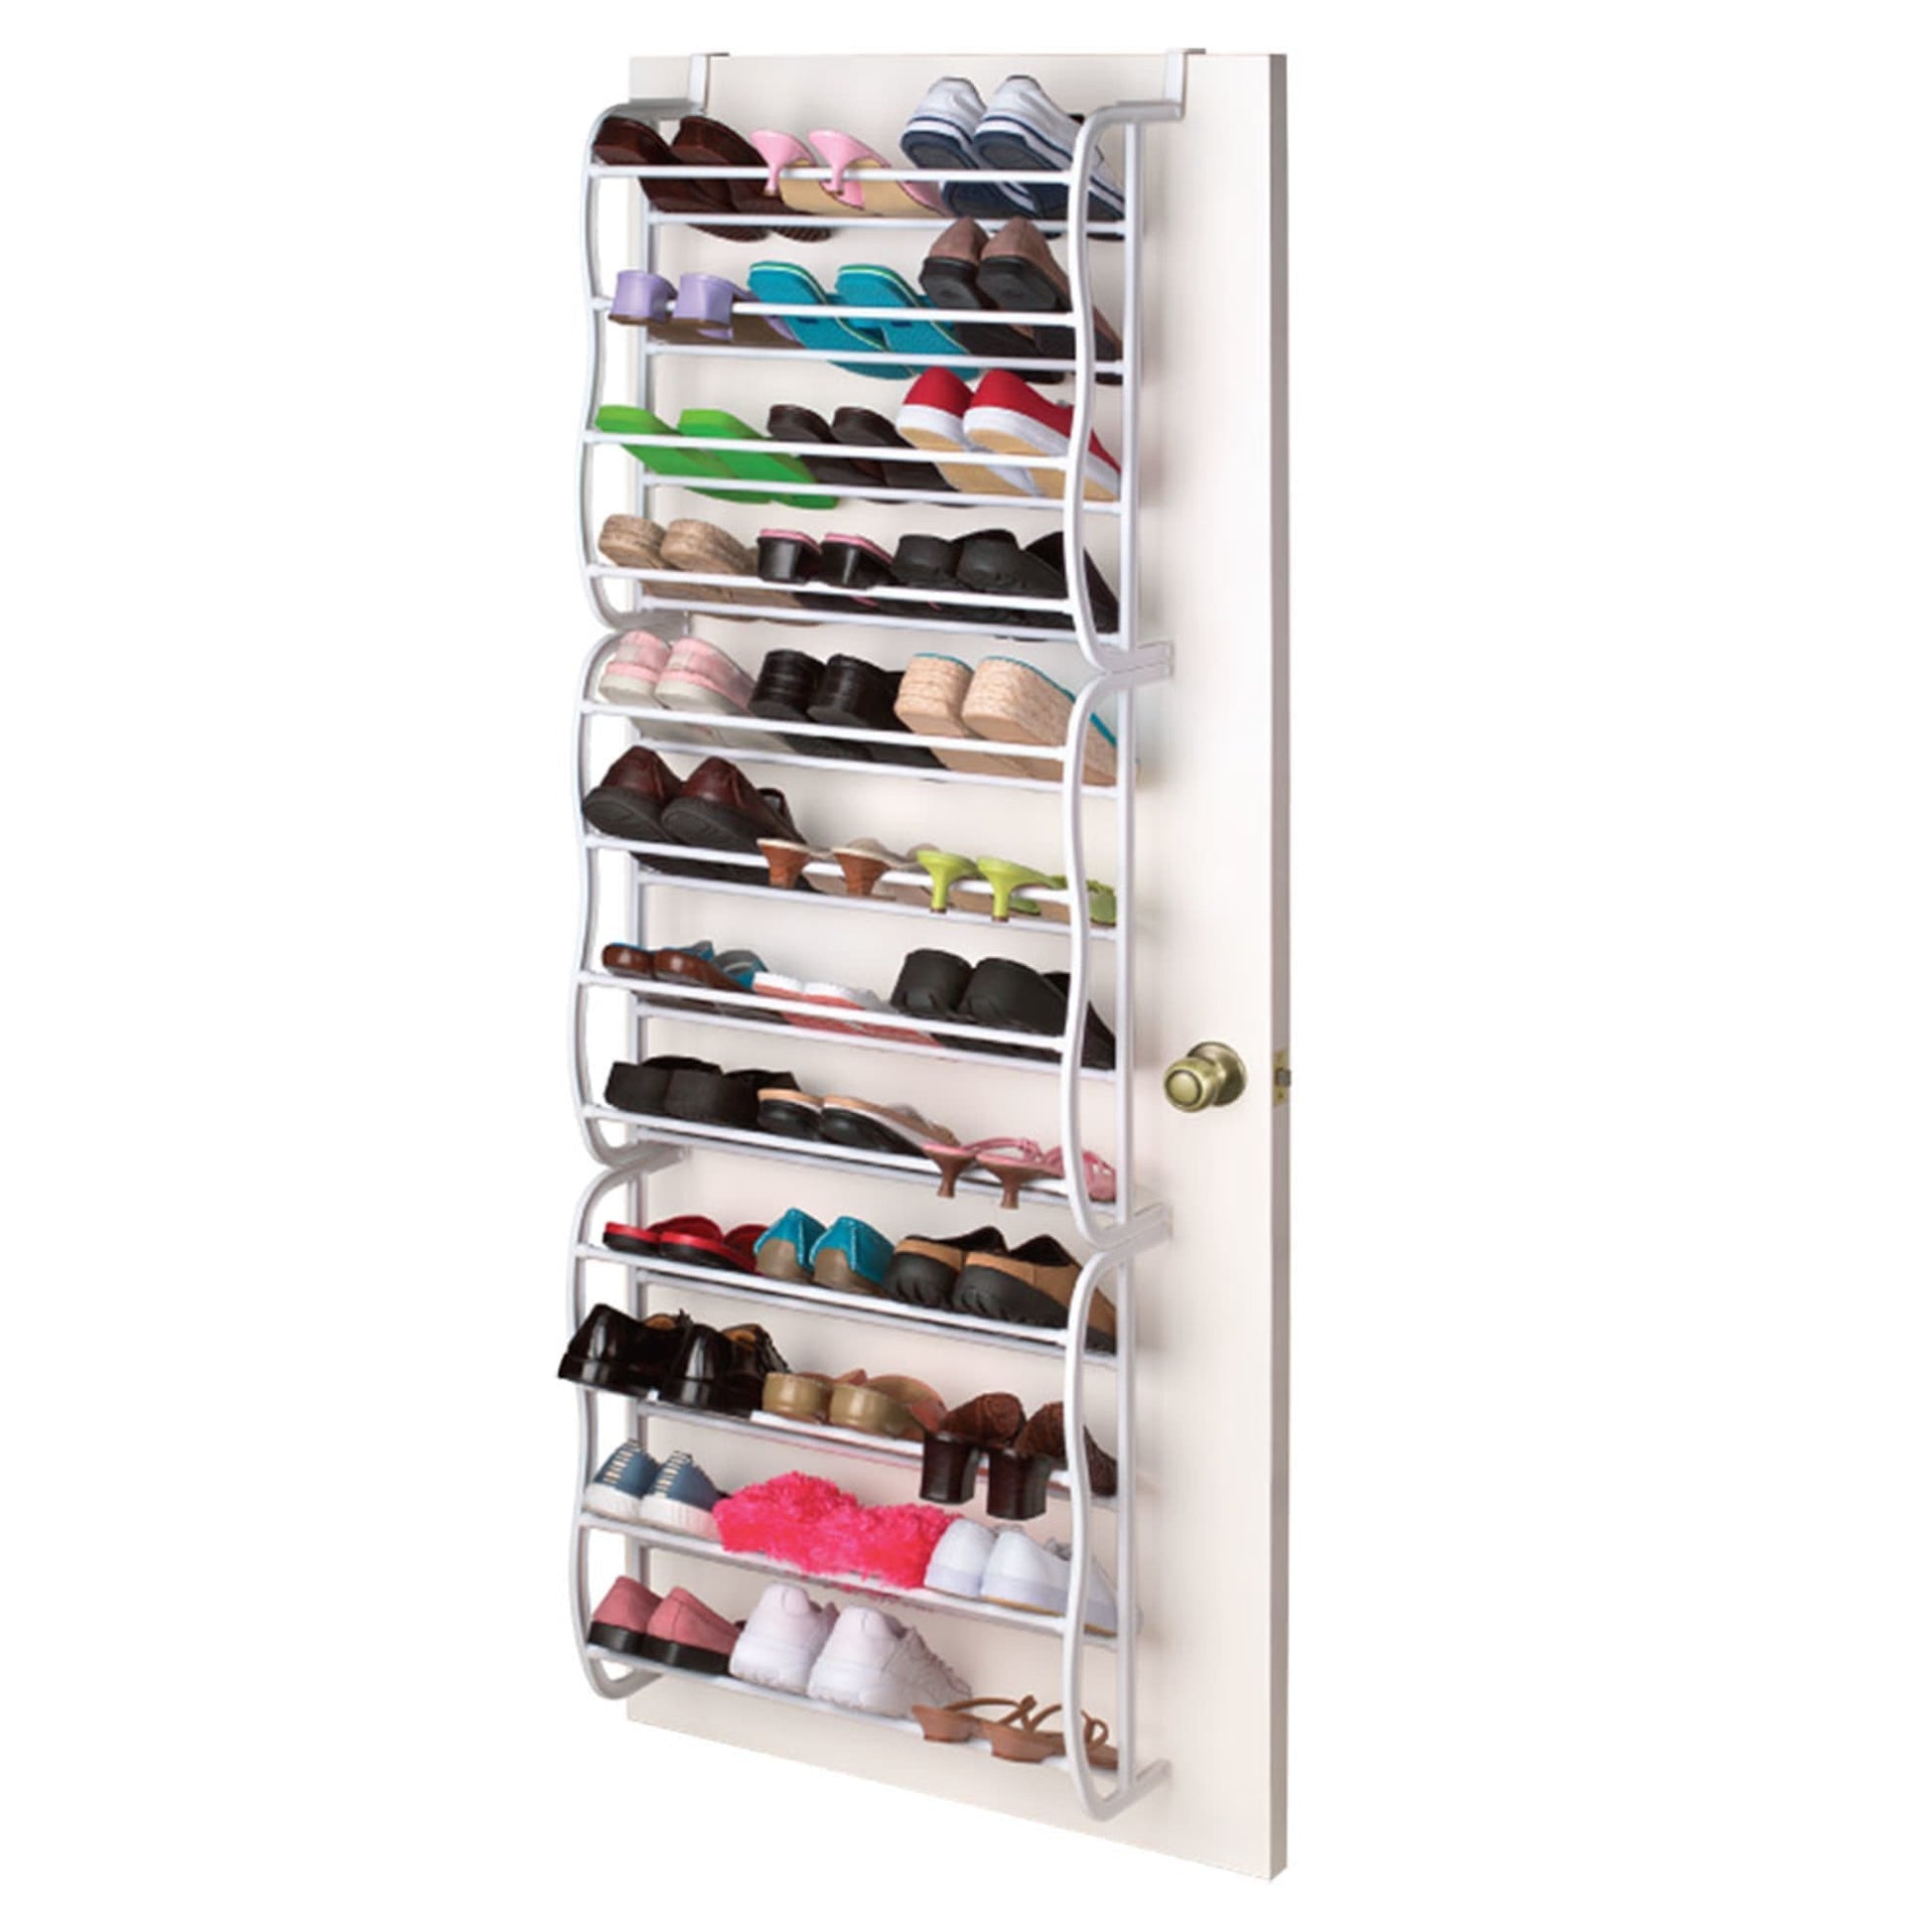 Mainstays 4-Tier Shoe Rack White Plastic Frame, Gray Coating, Up to 12 Pairs